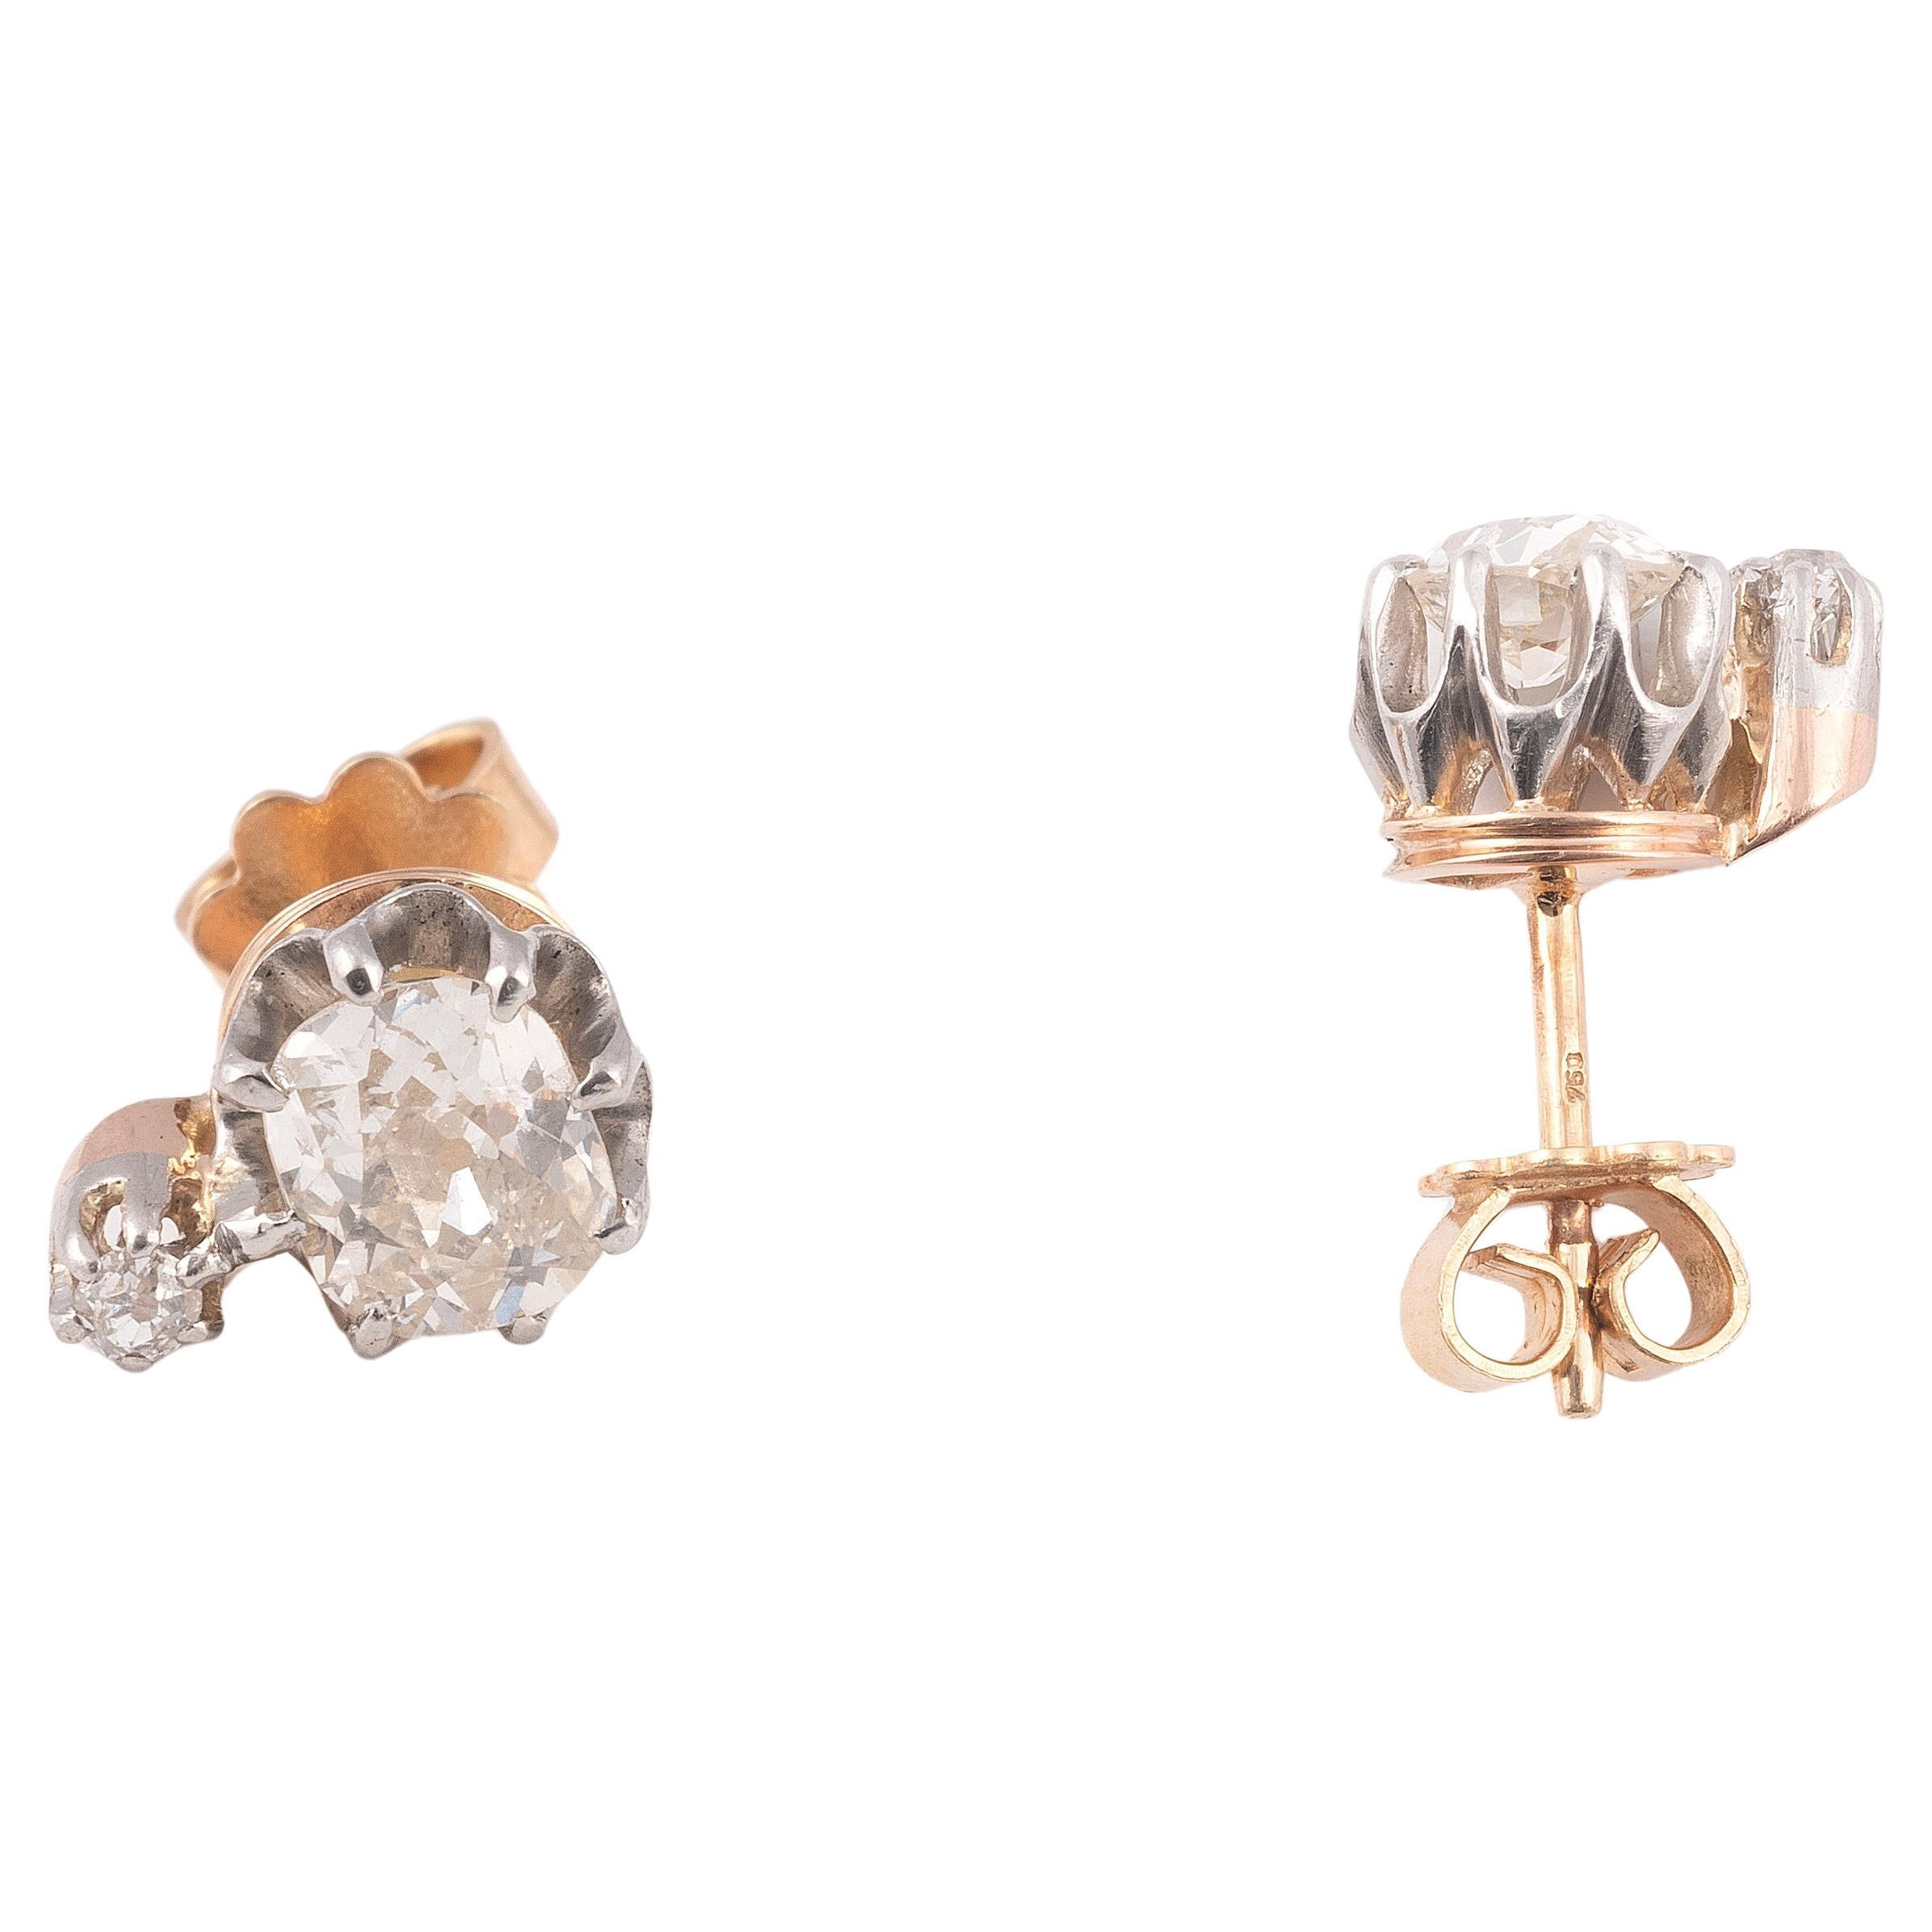 Pair of diamond earrings. Set in 18K rose gold and platinum. 
Gross weight: 3.87 g (pierced ear system). 
Diamond weight: approx. 1 carat each. 
Condition report : excellent
Diamond expert opinion: K/L color, SI purity, no fluorescence.